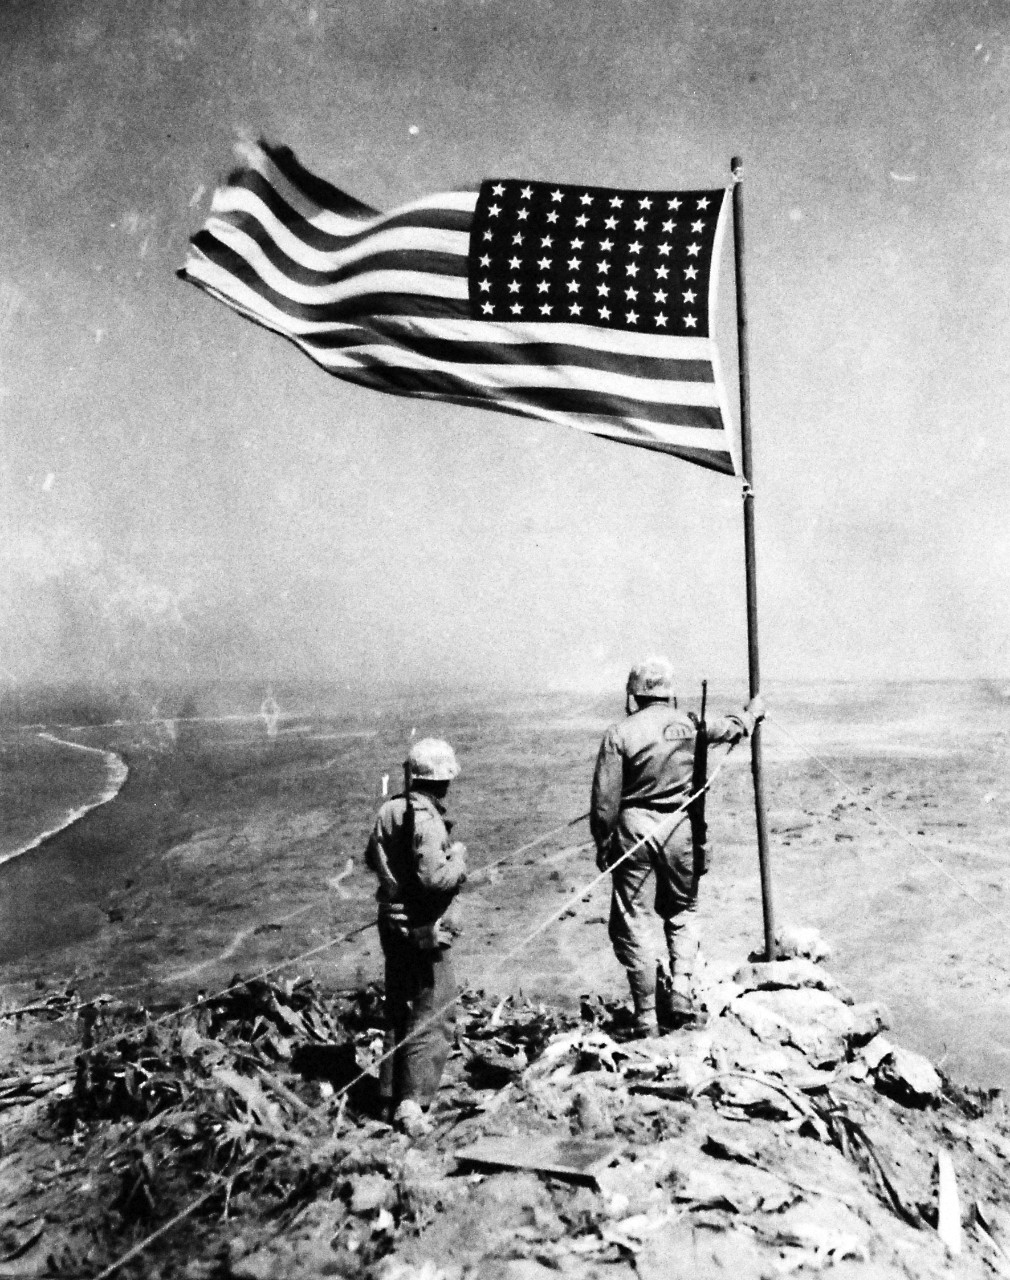 127-GW-319-142858:    Iwo Jima Operations,  February 1945.   View to Northwest from Mount Suribachi, photographed by Kauffman, 1945.  Official U.S. Marine Corps Photograph, now in the collections of the National Archives.  (2016/09/06).